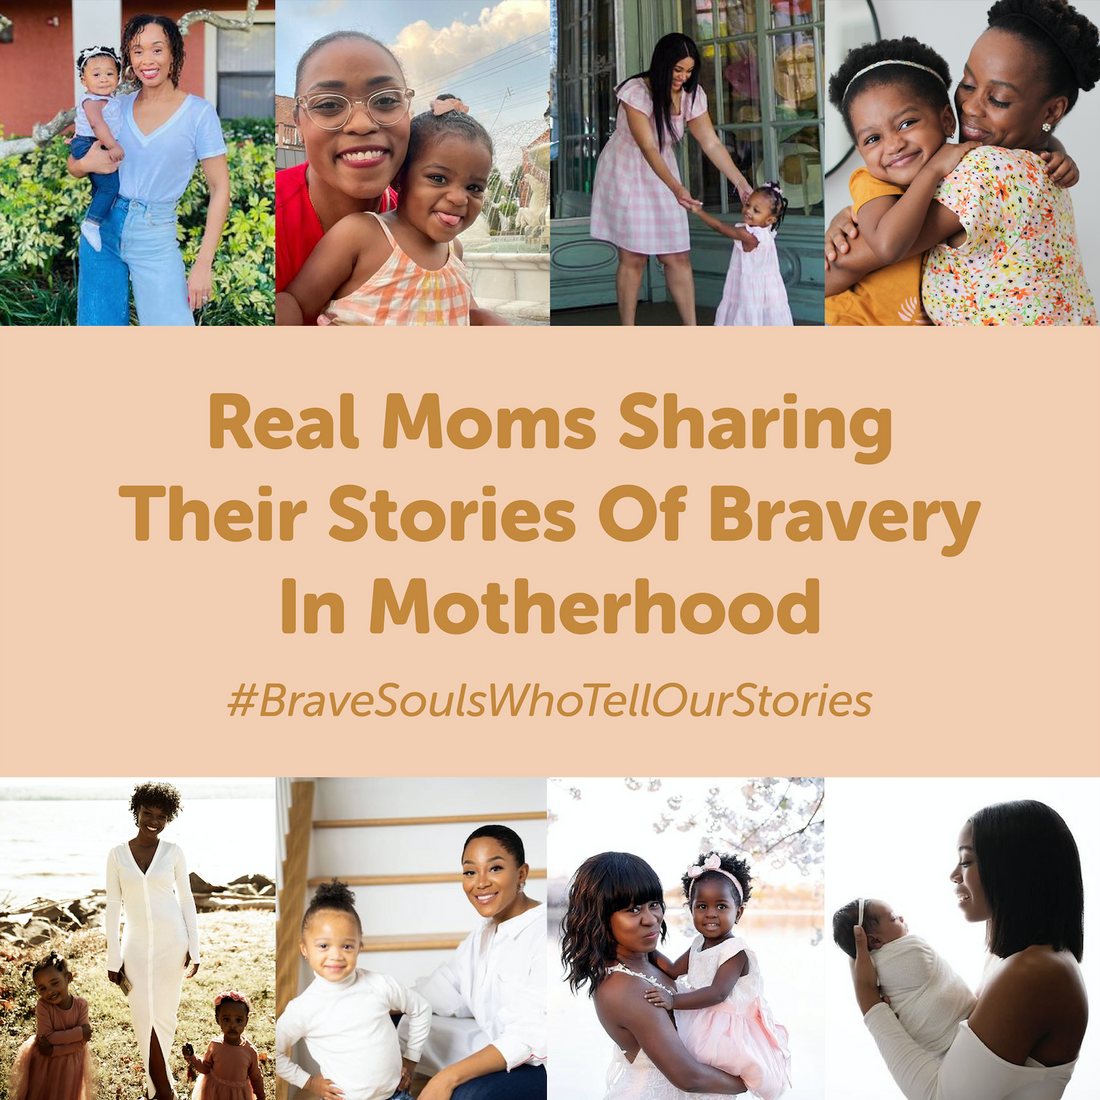 #BraveSoulsWhoTellOurStories - Real Moms Sharing Their Stories Of Bravery In Motherhood